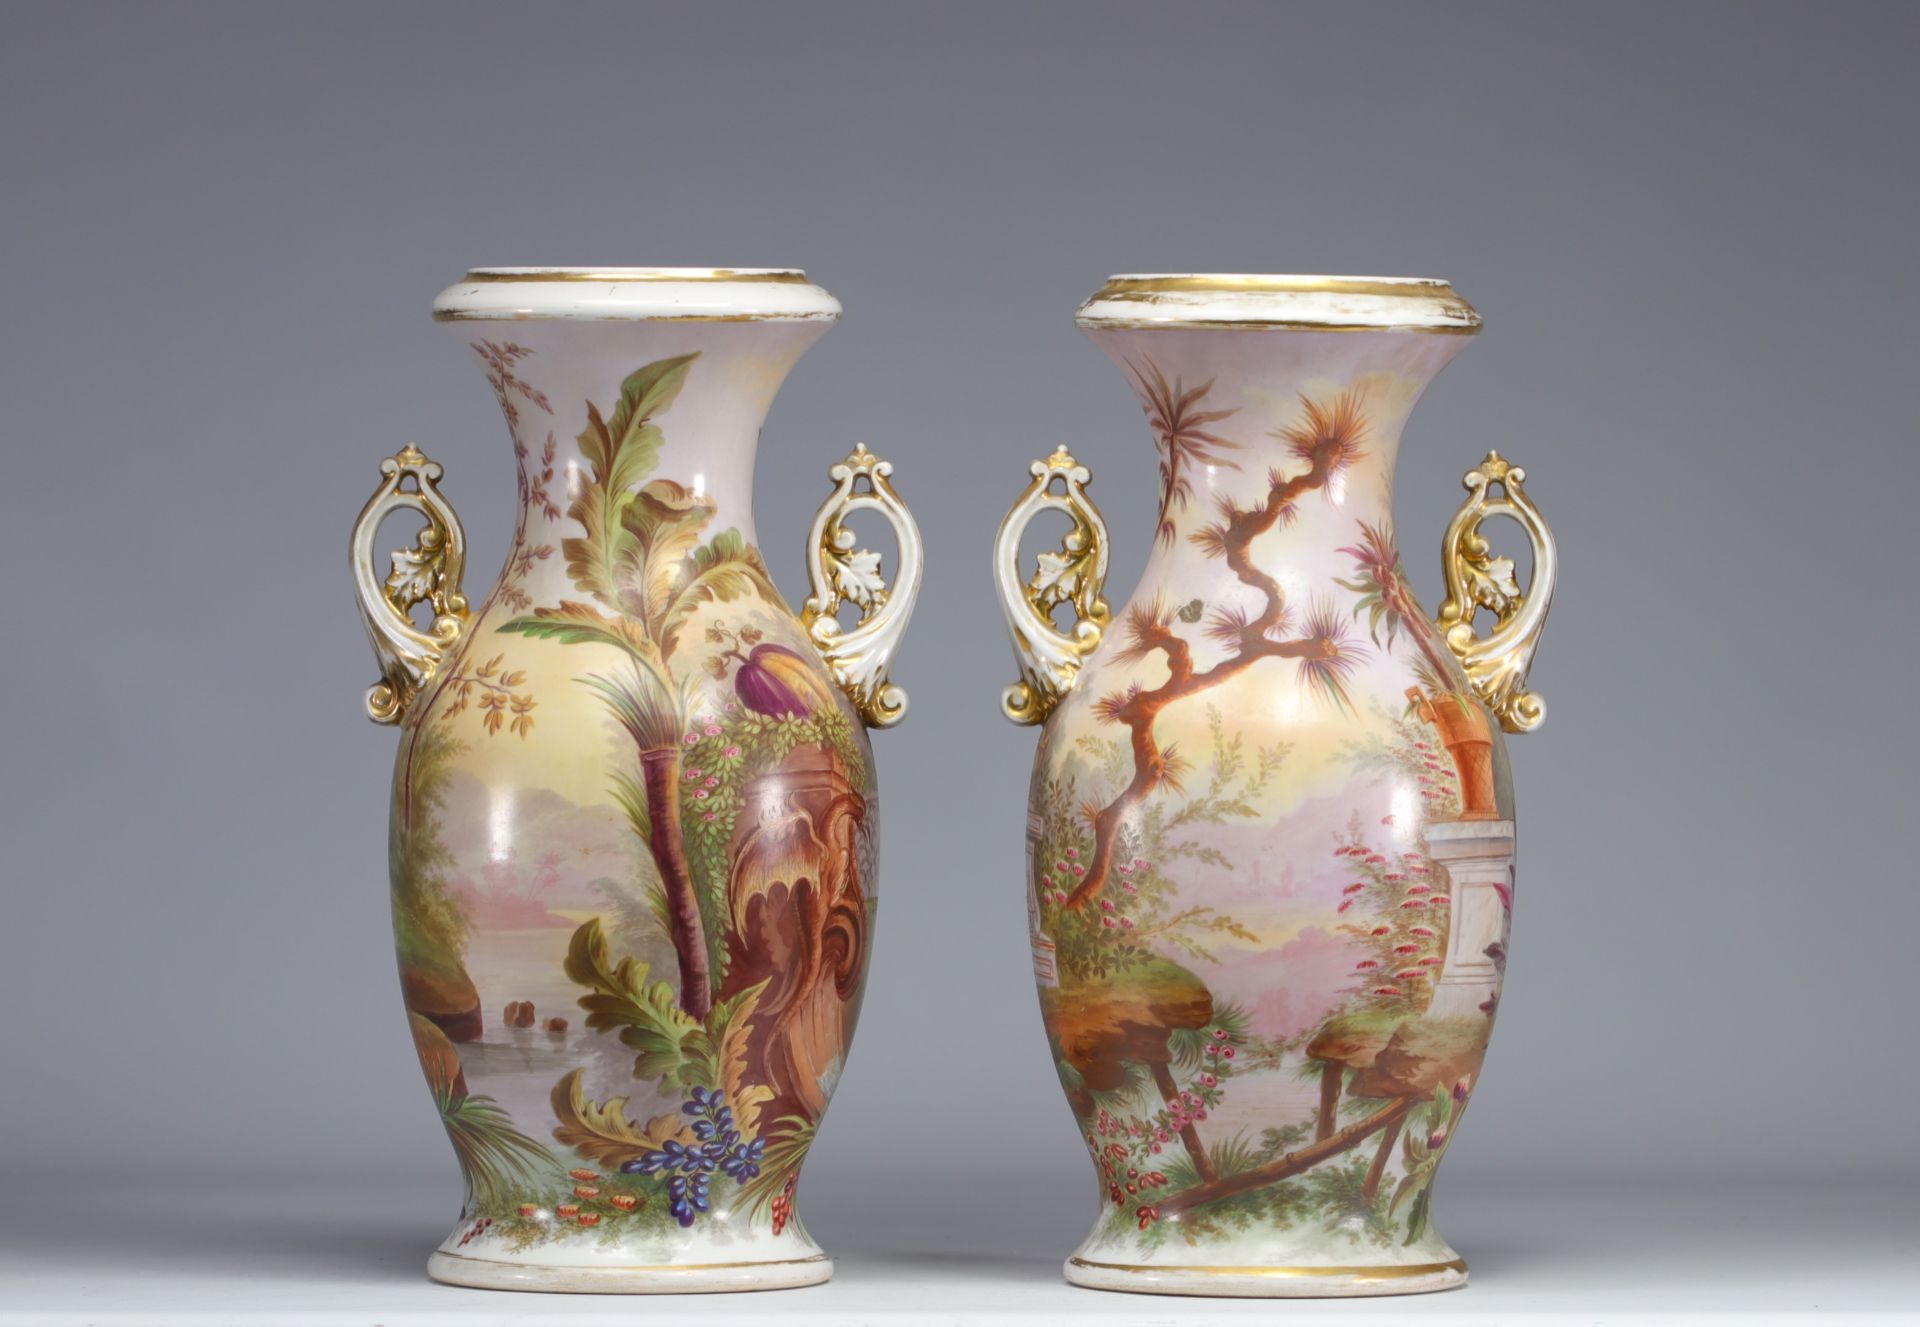 Pair of 19th century porcelain of Paris vases with a rich Asian decoration. - Image 2 of 6